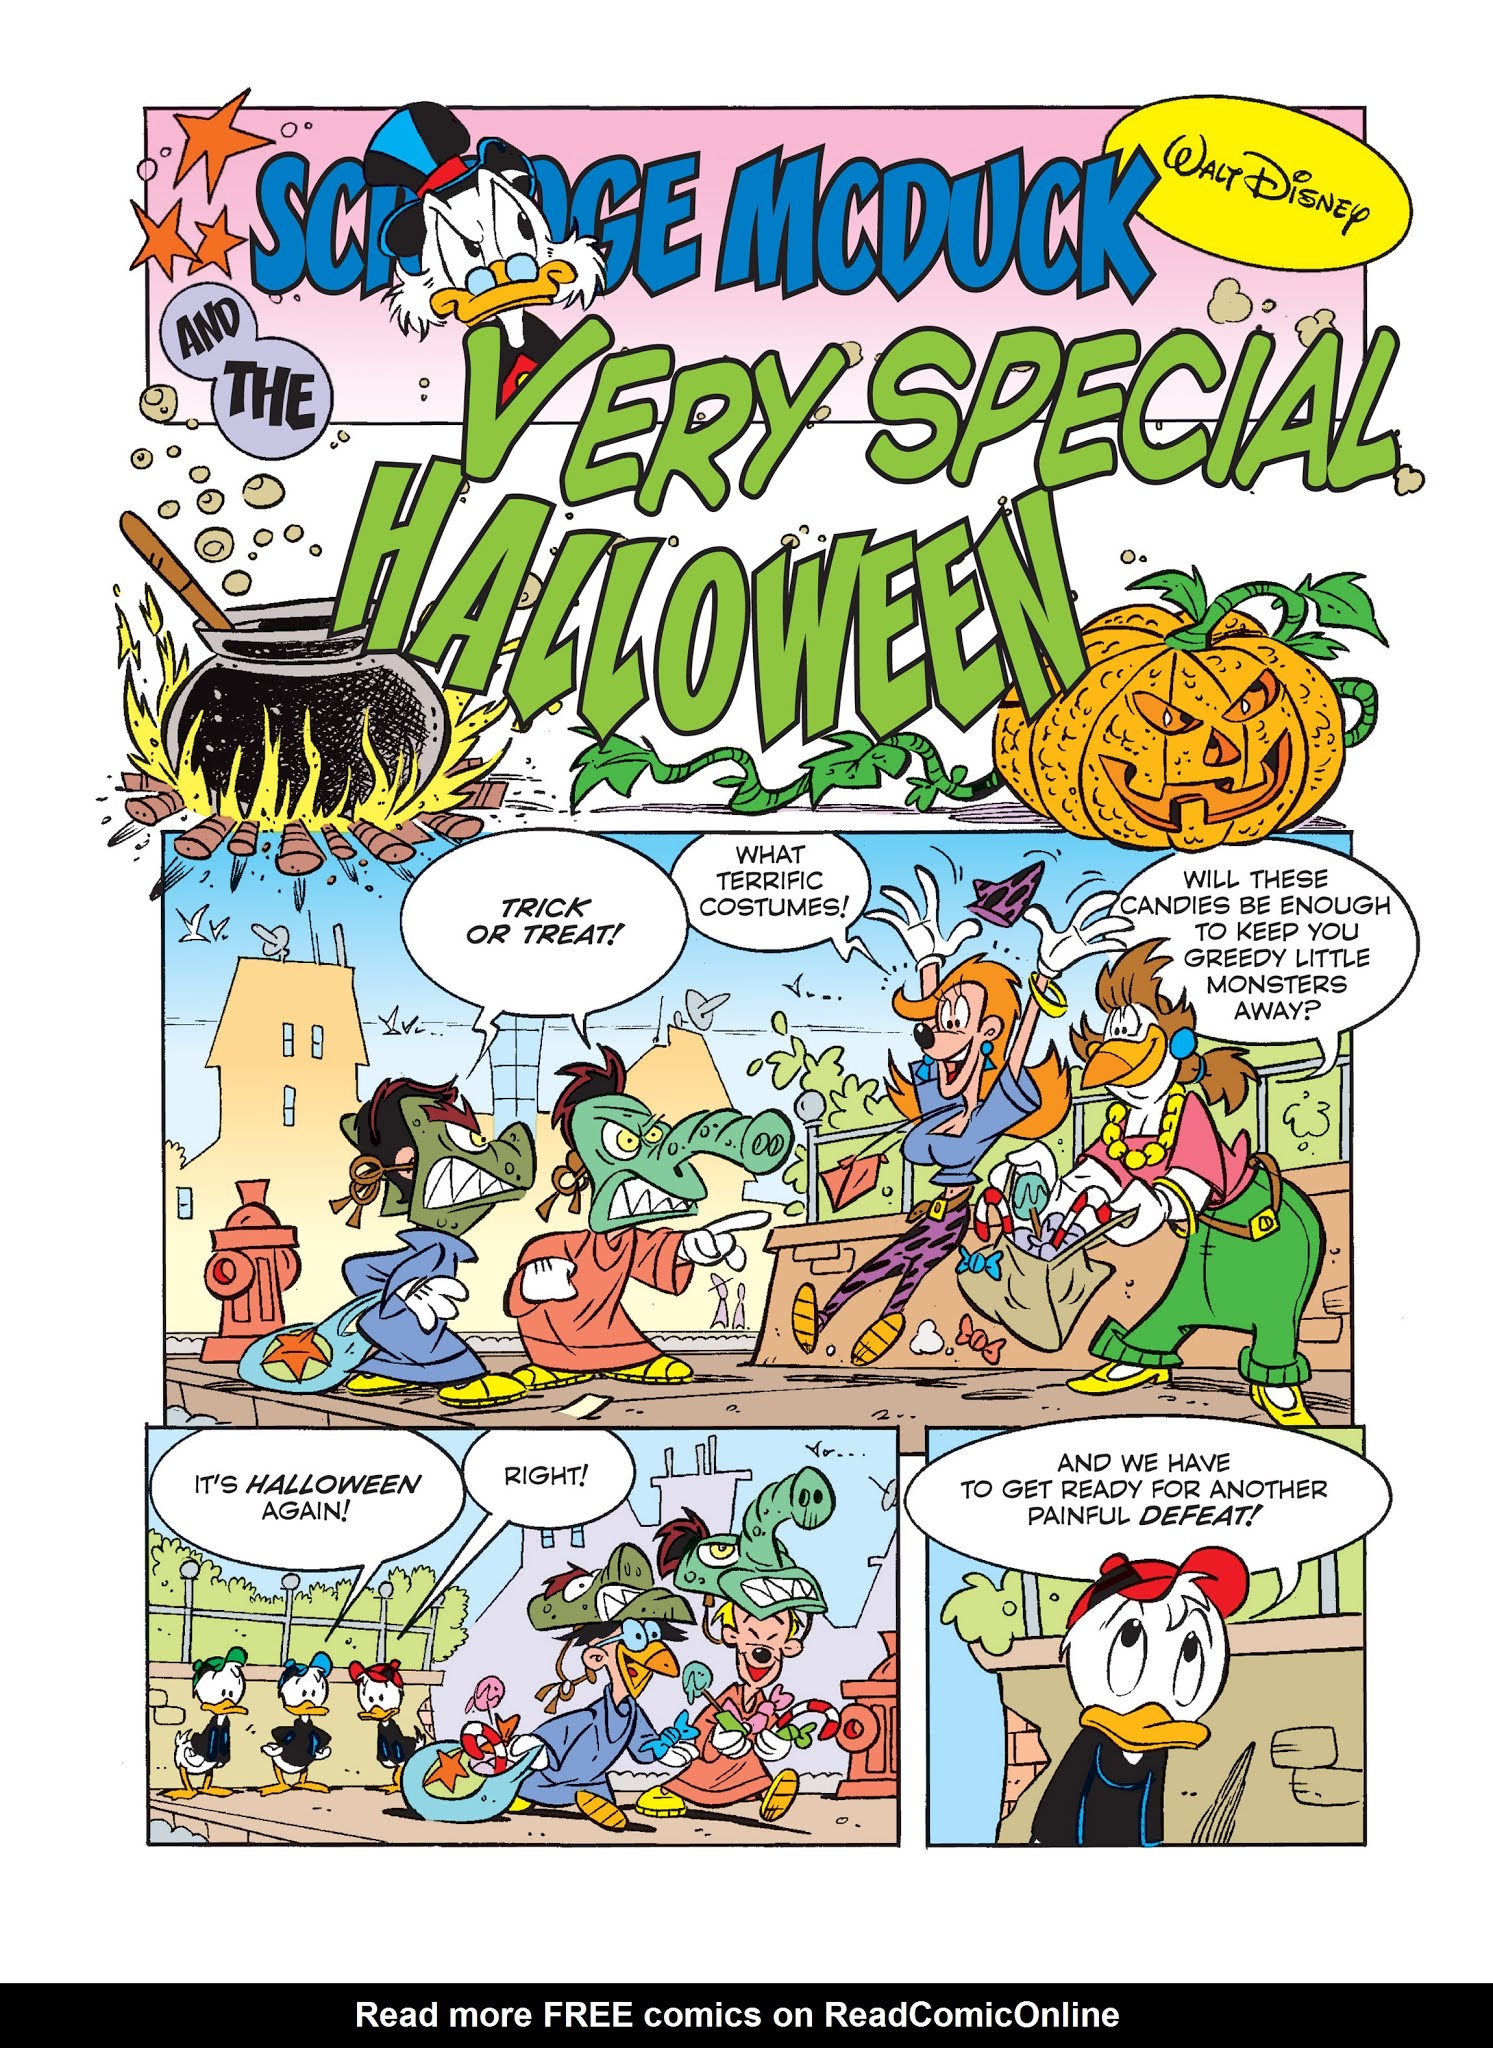 Read online Scrooge McDuck and the Very Special Halloween comic -  Issue # Full - 2